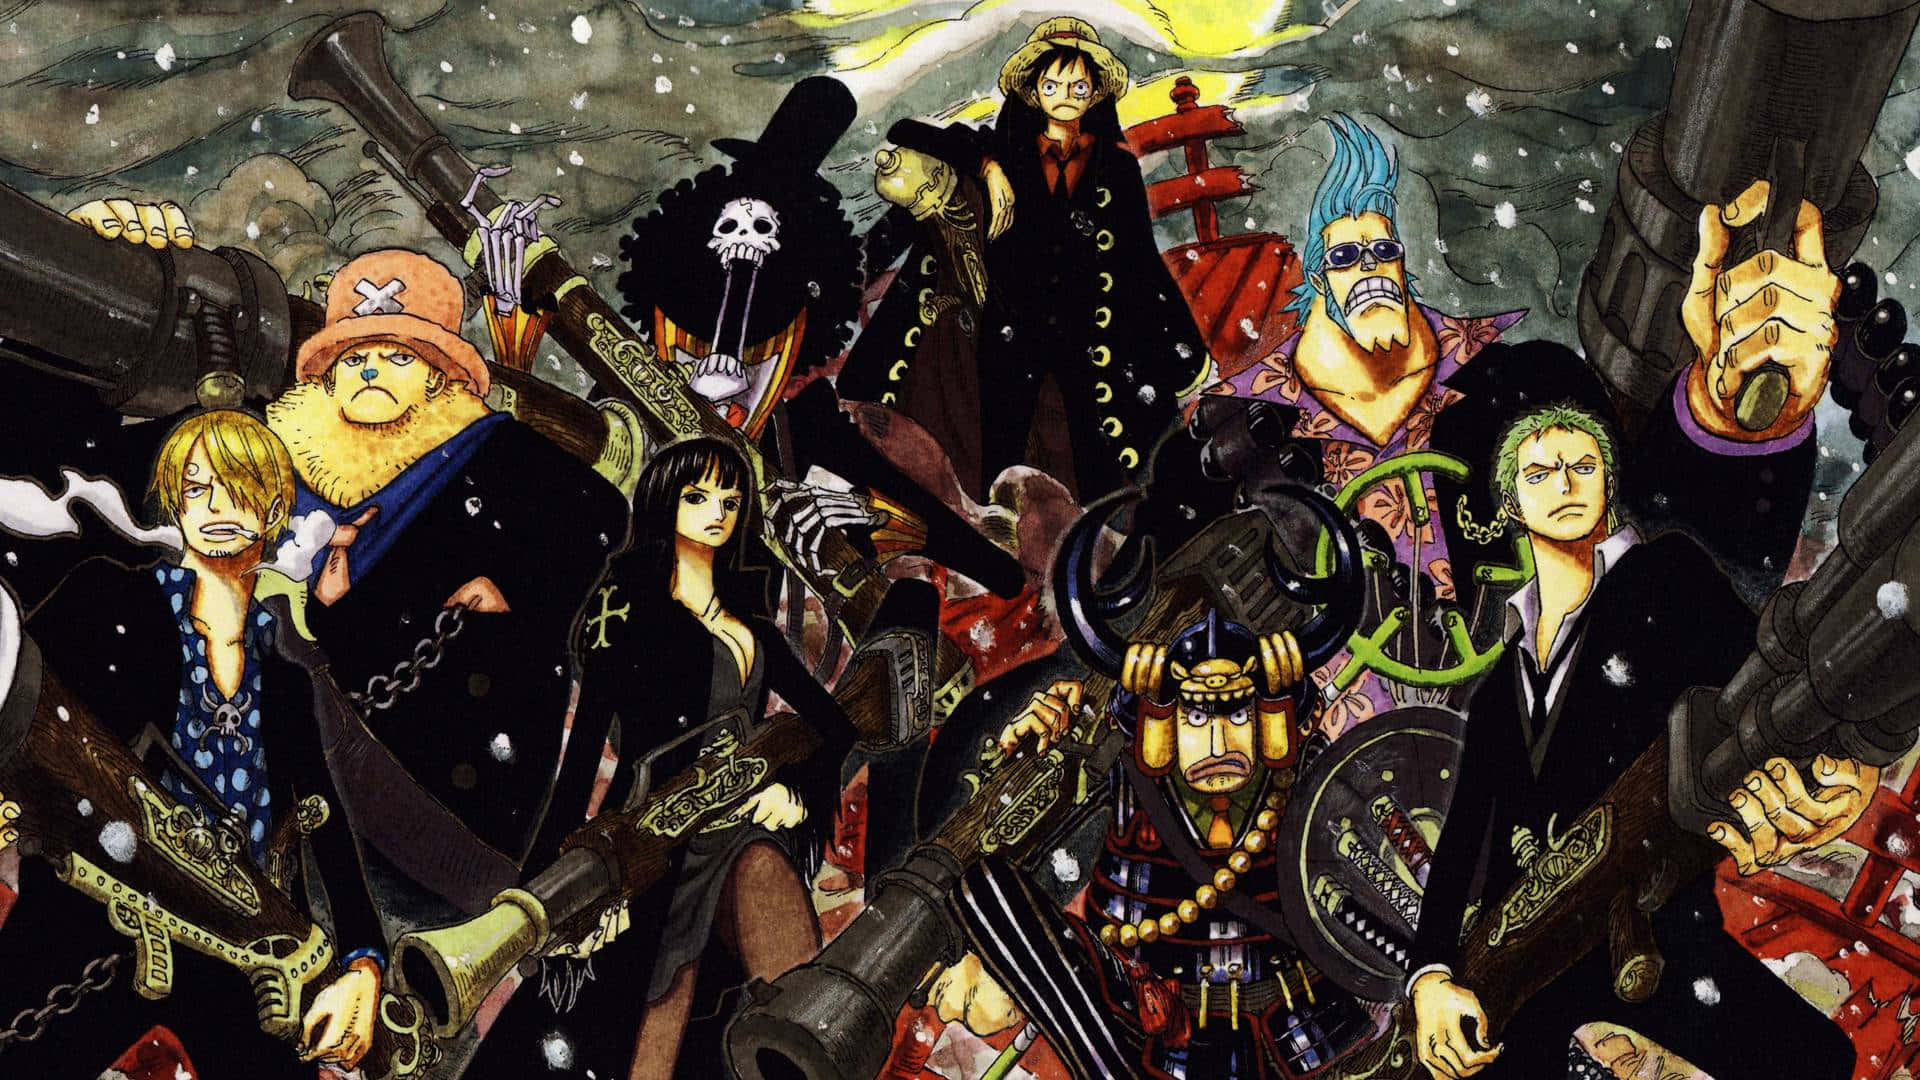 One Piece Characters Assemble for Adventure Wallpaper